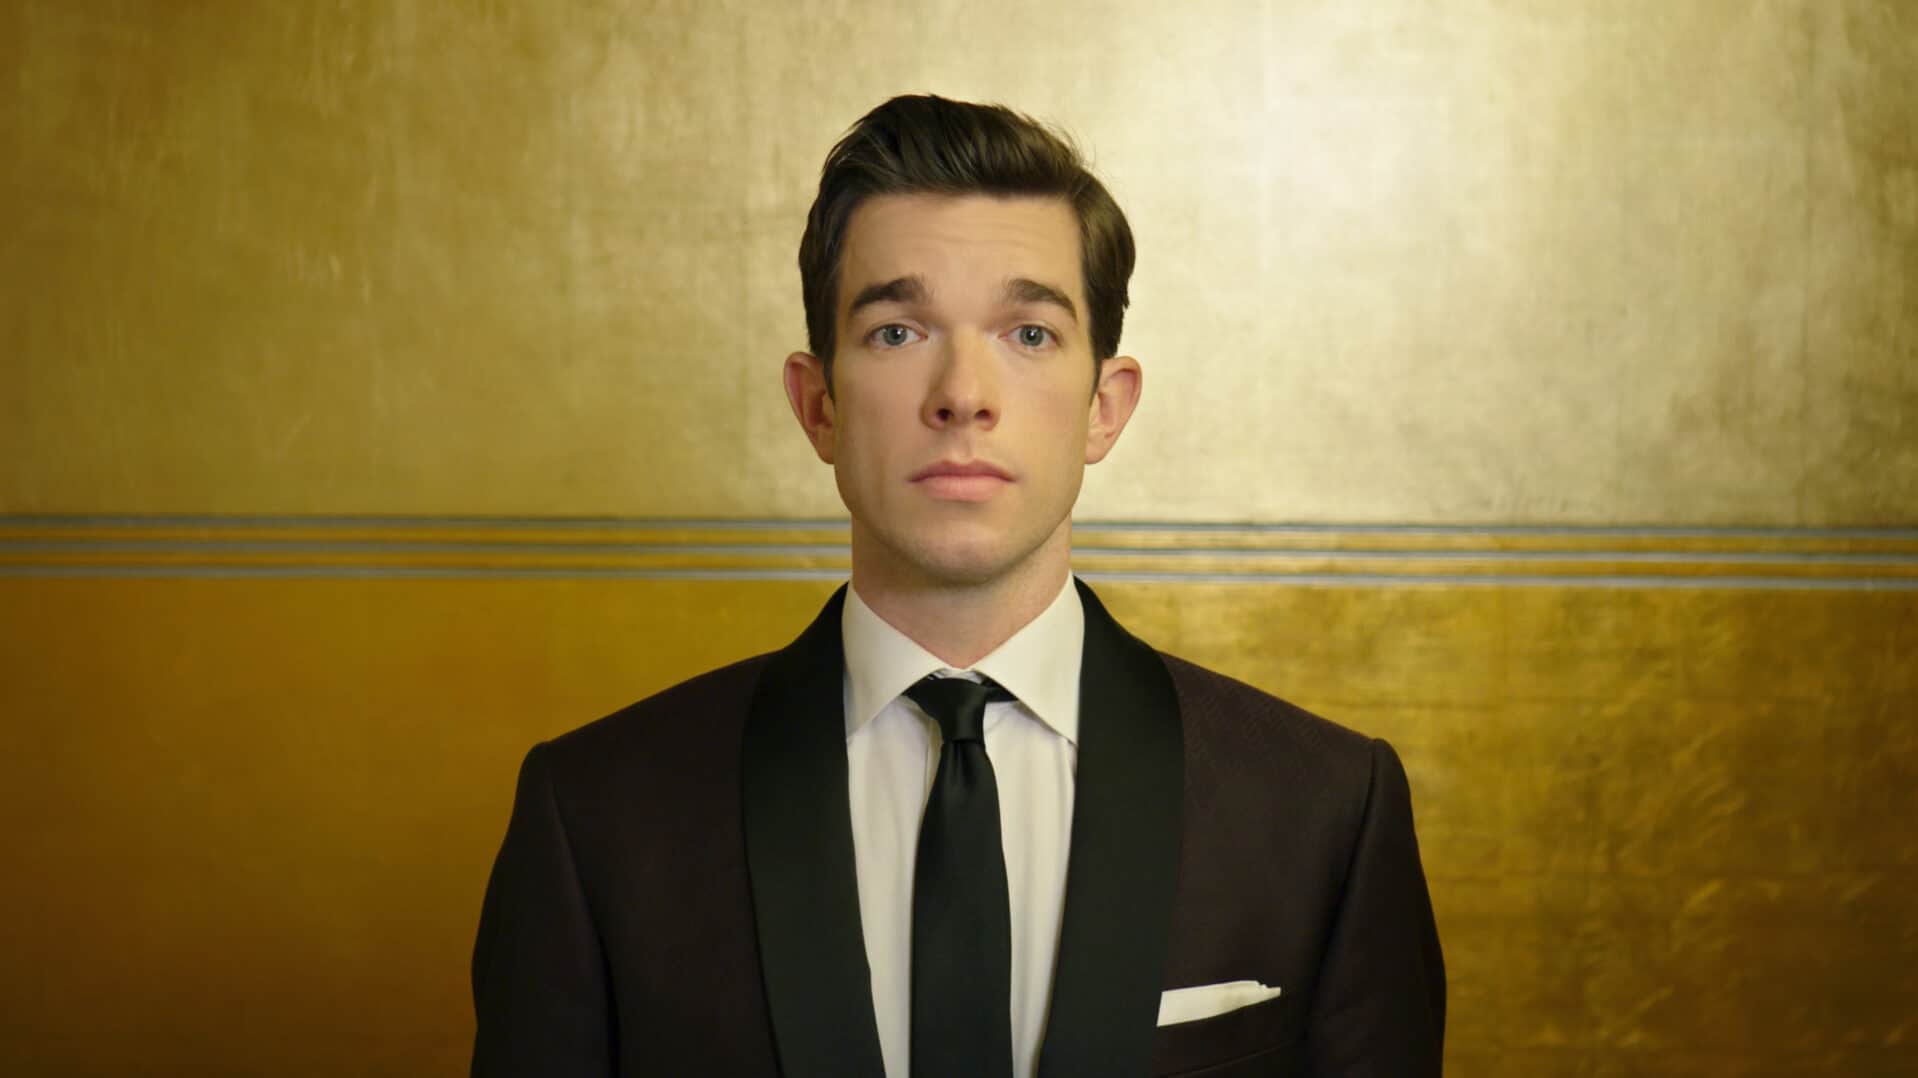 How rich is John Mulaney?